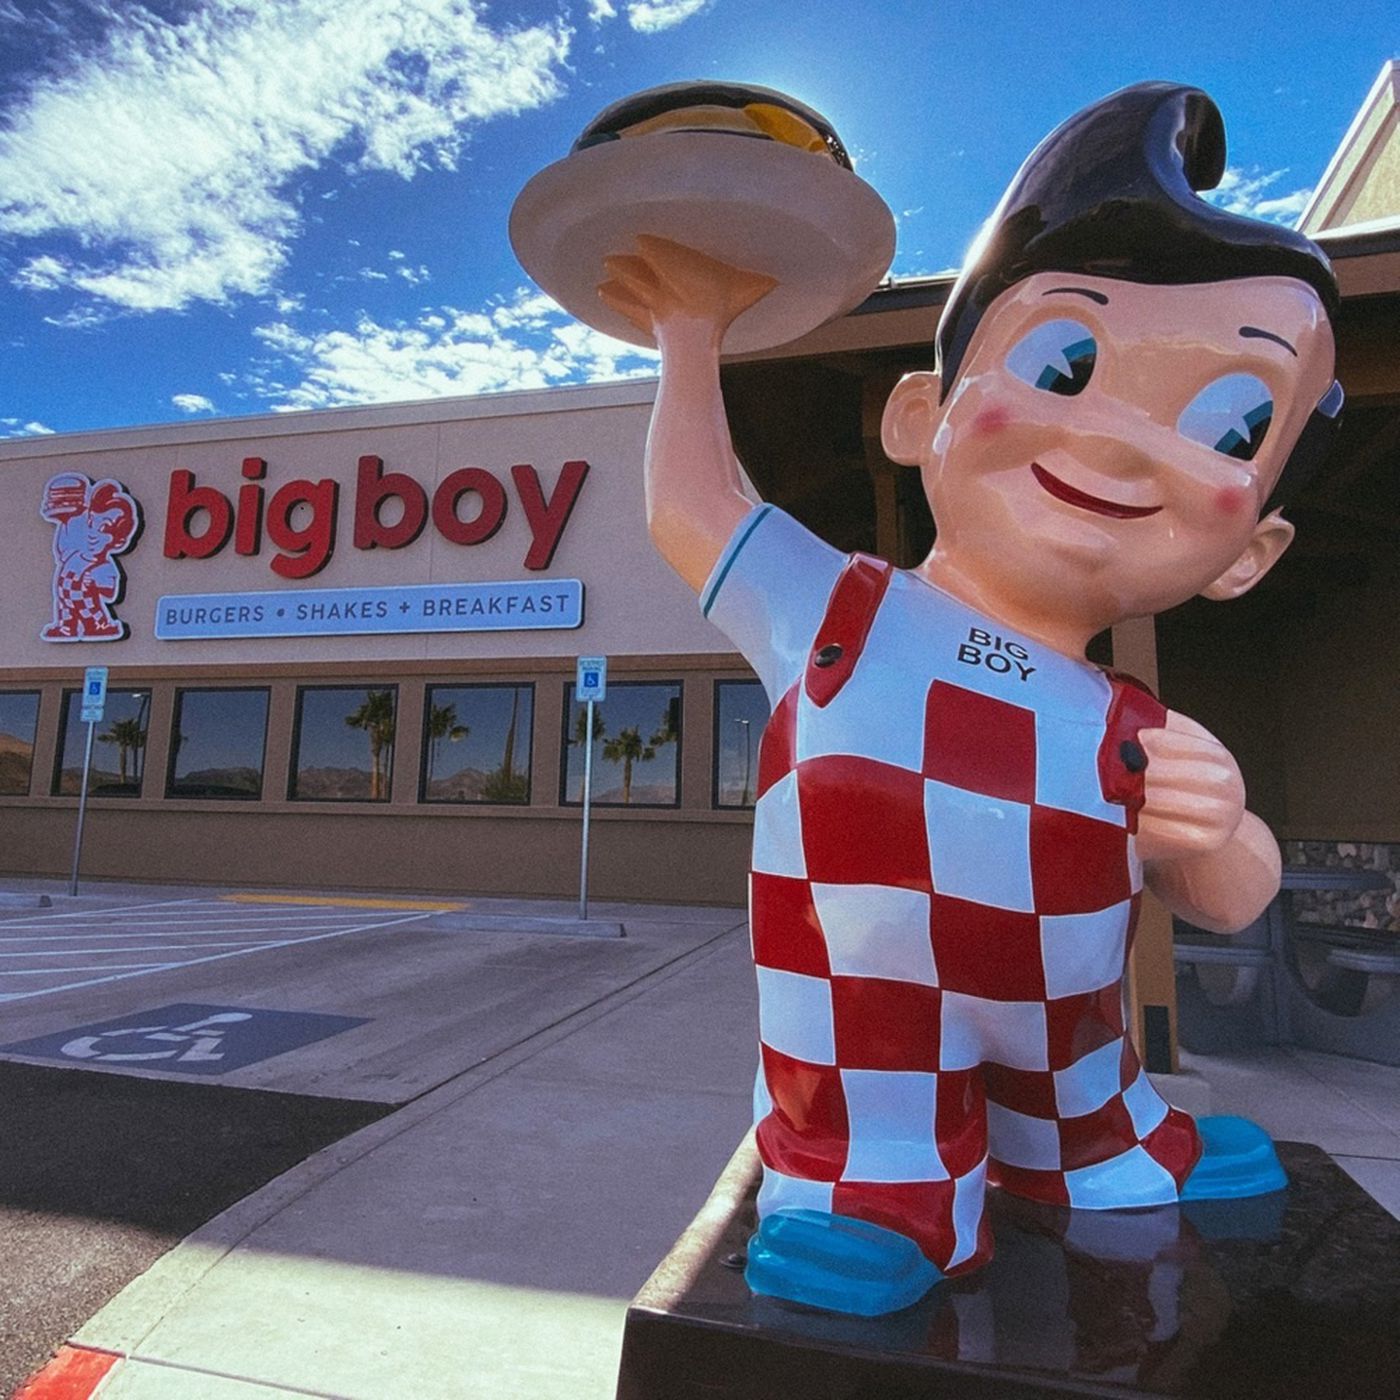 Big Boy returns to Nevada with classic burgers and shakes - Eater Vegas